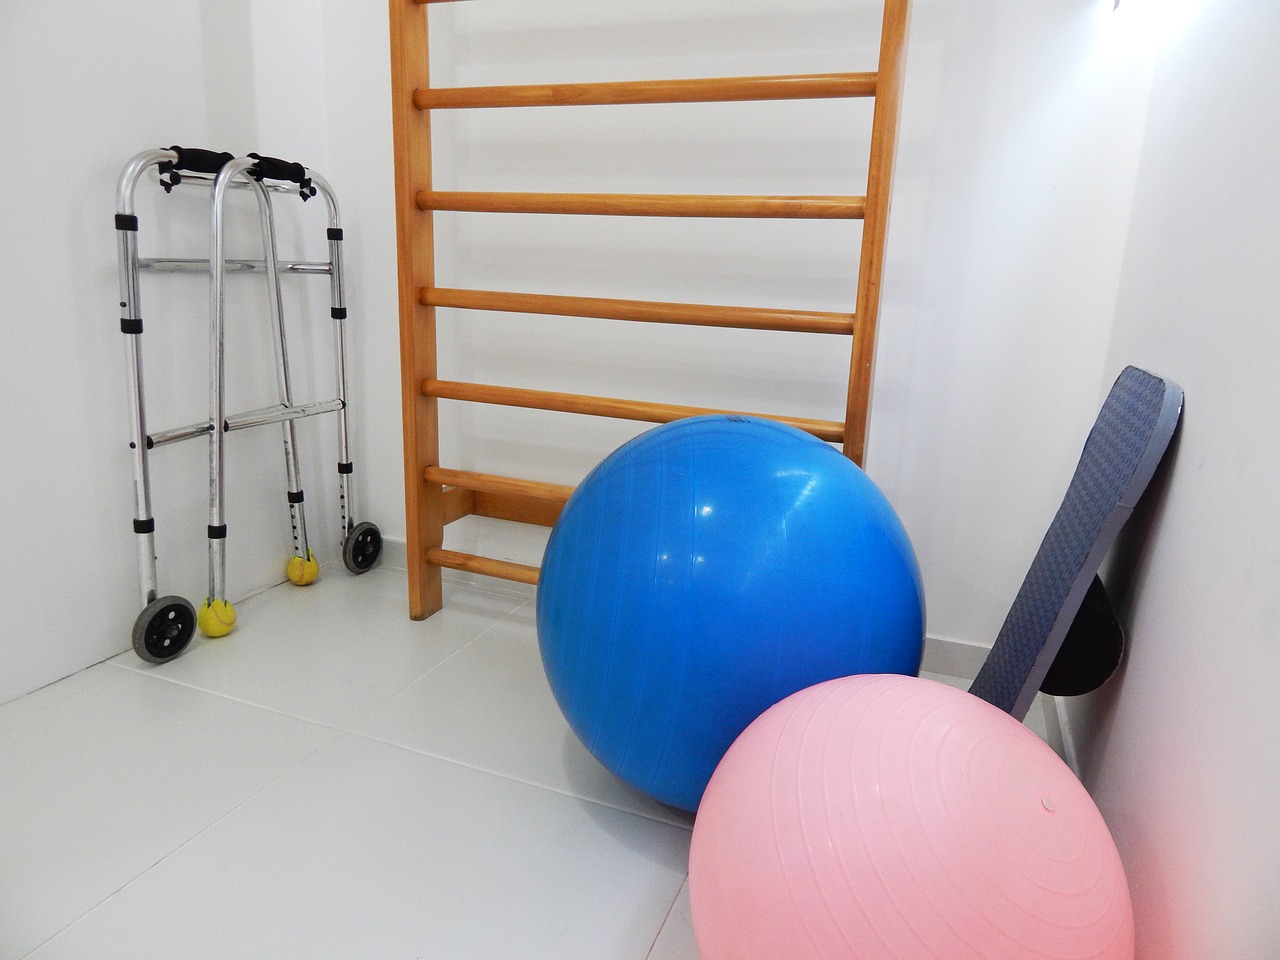 Walker, ladder, and exercise balls in a room